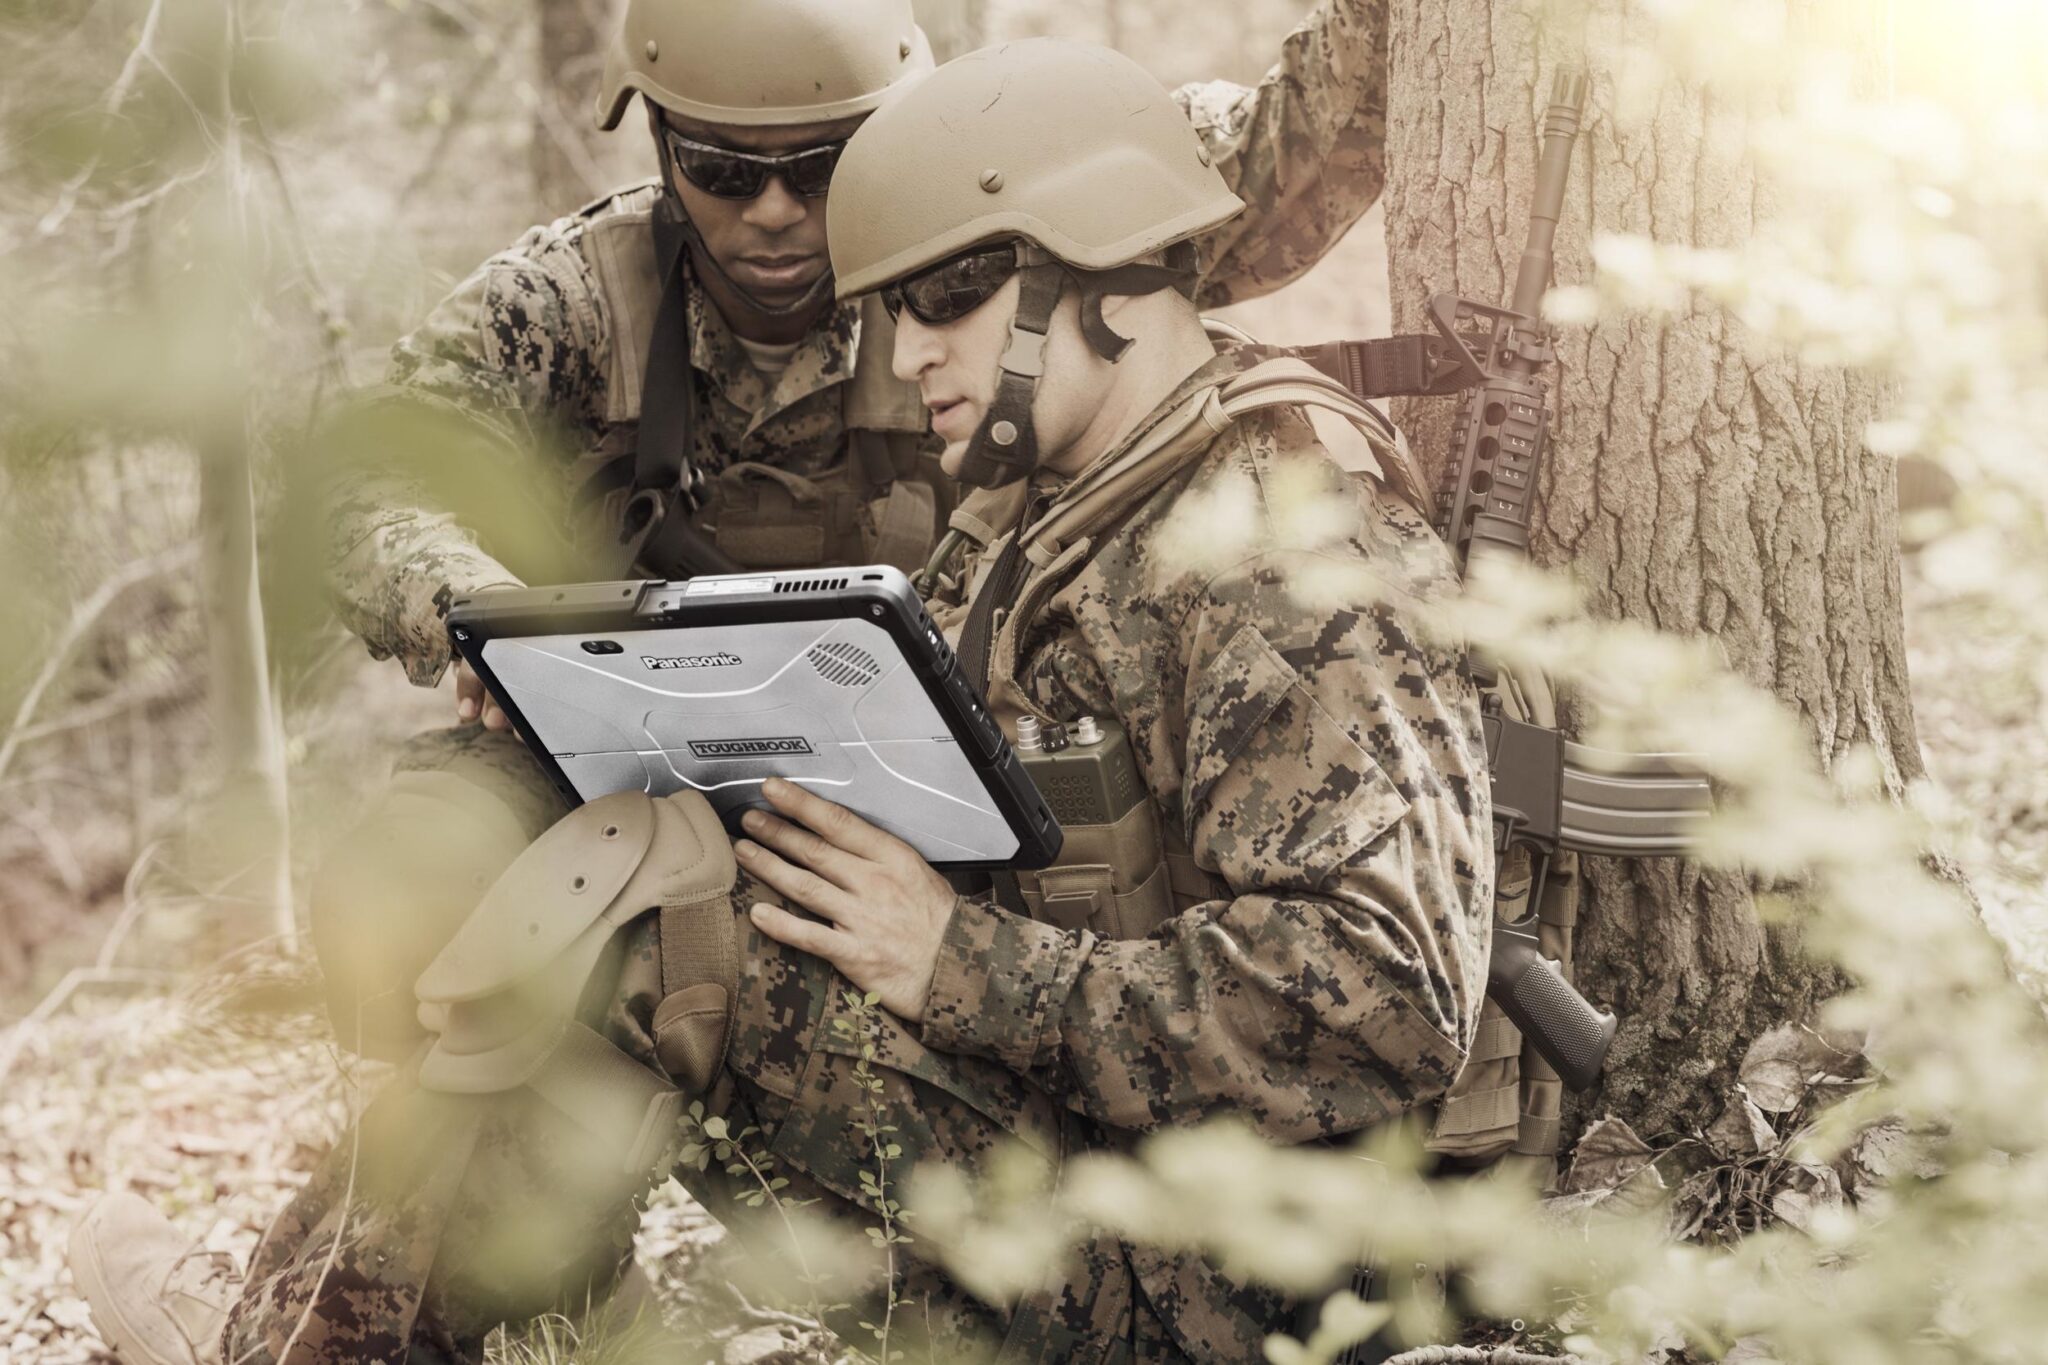 Marines using Panasonic rugged tablet in the field